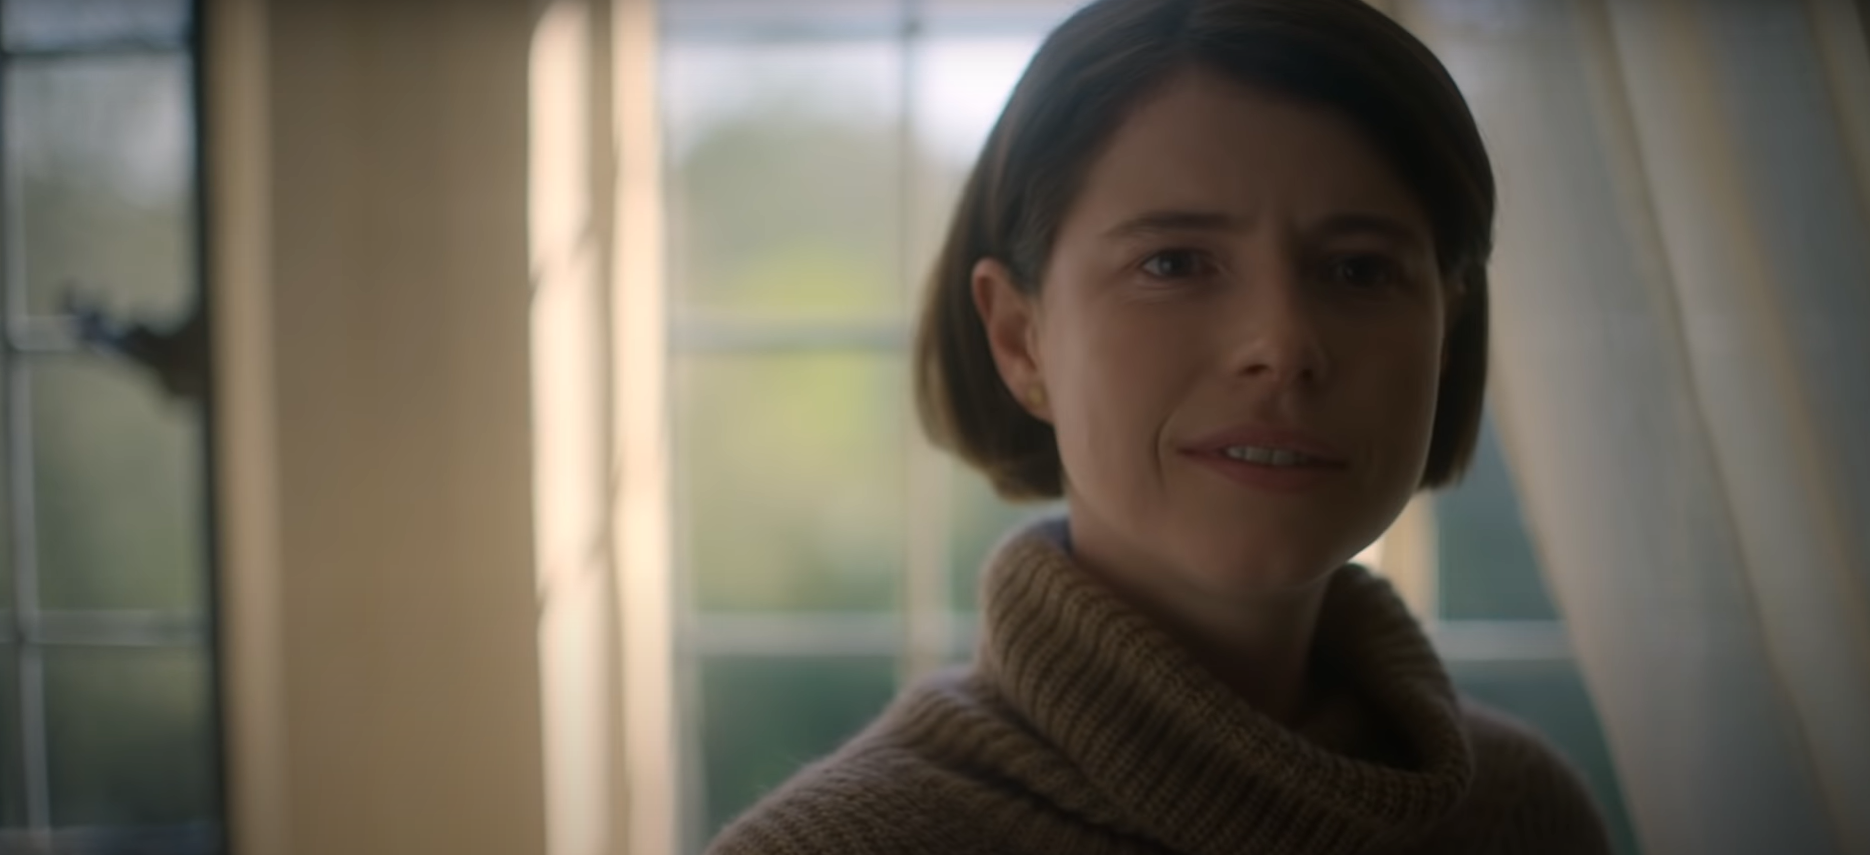 Trailer Watch: Jessie Buckley Is Haunted and Hunted in “Men”